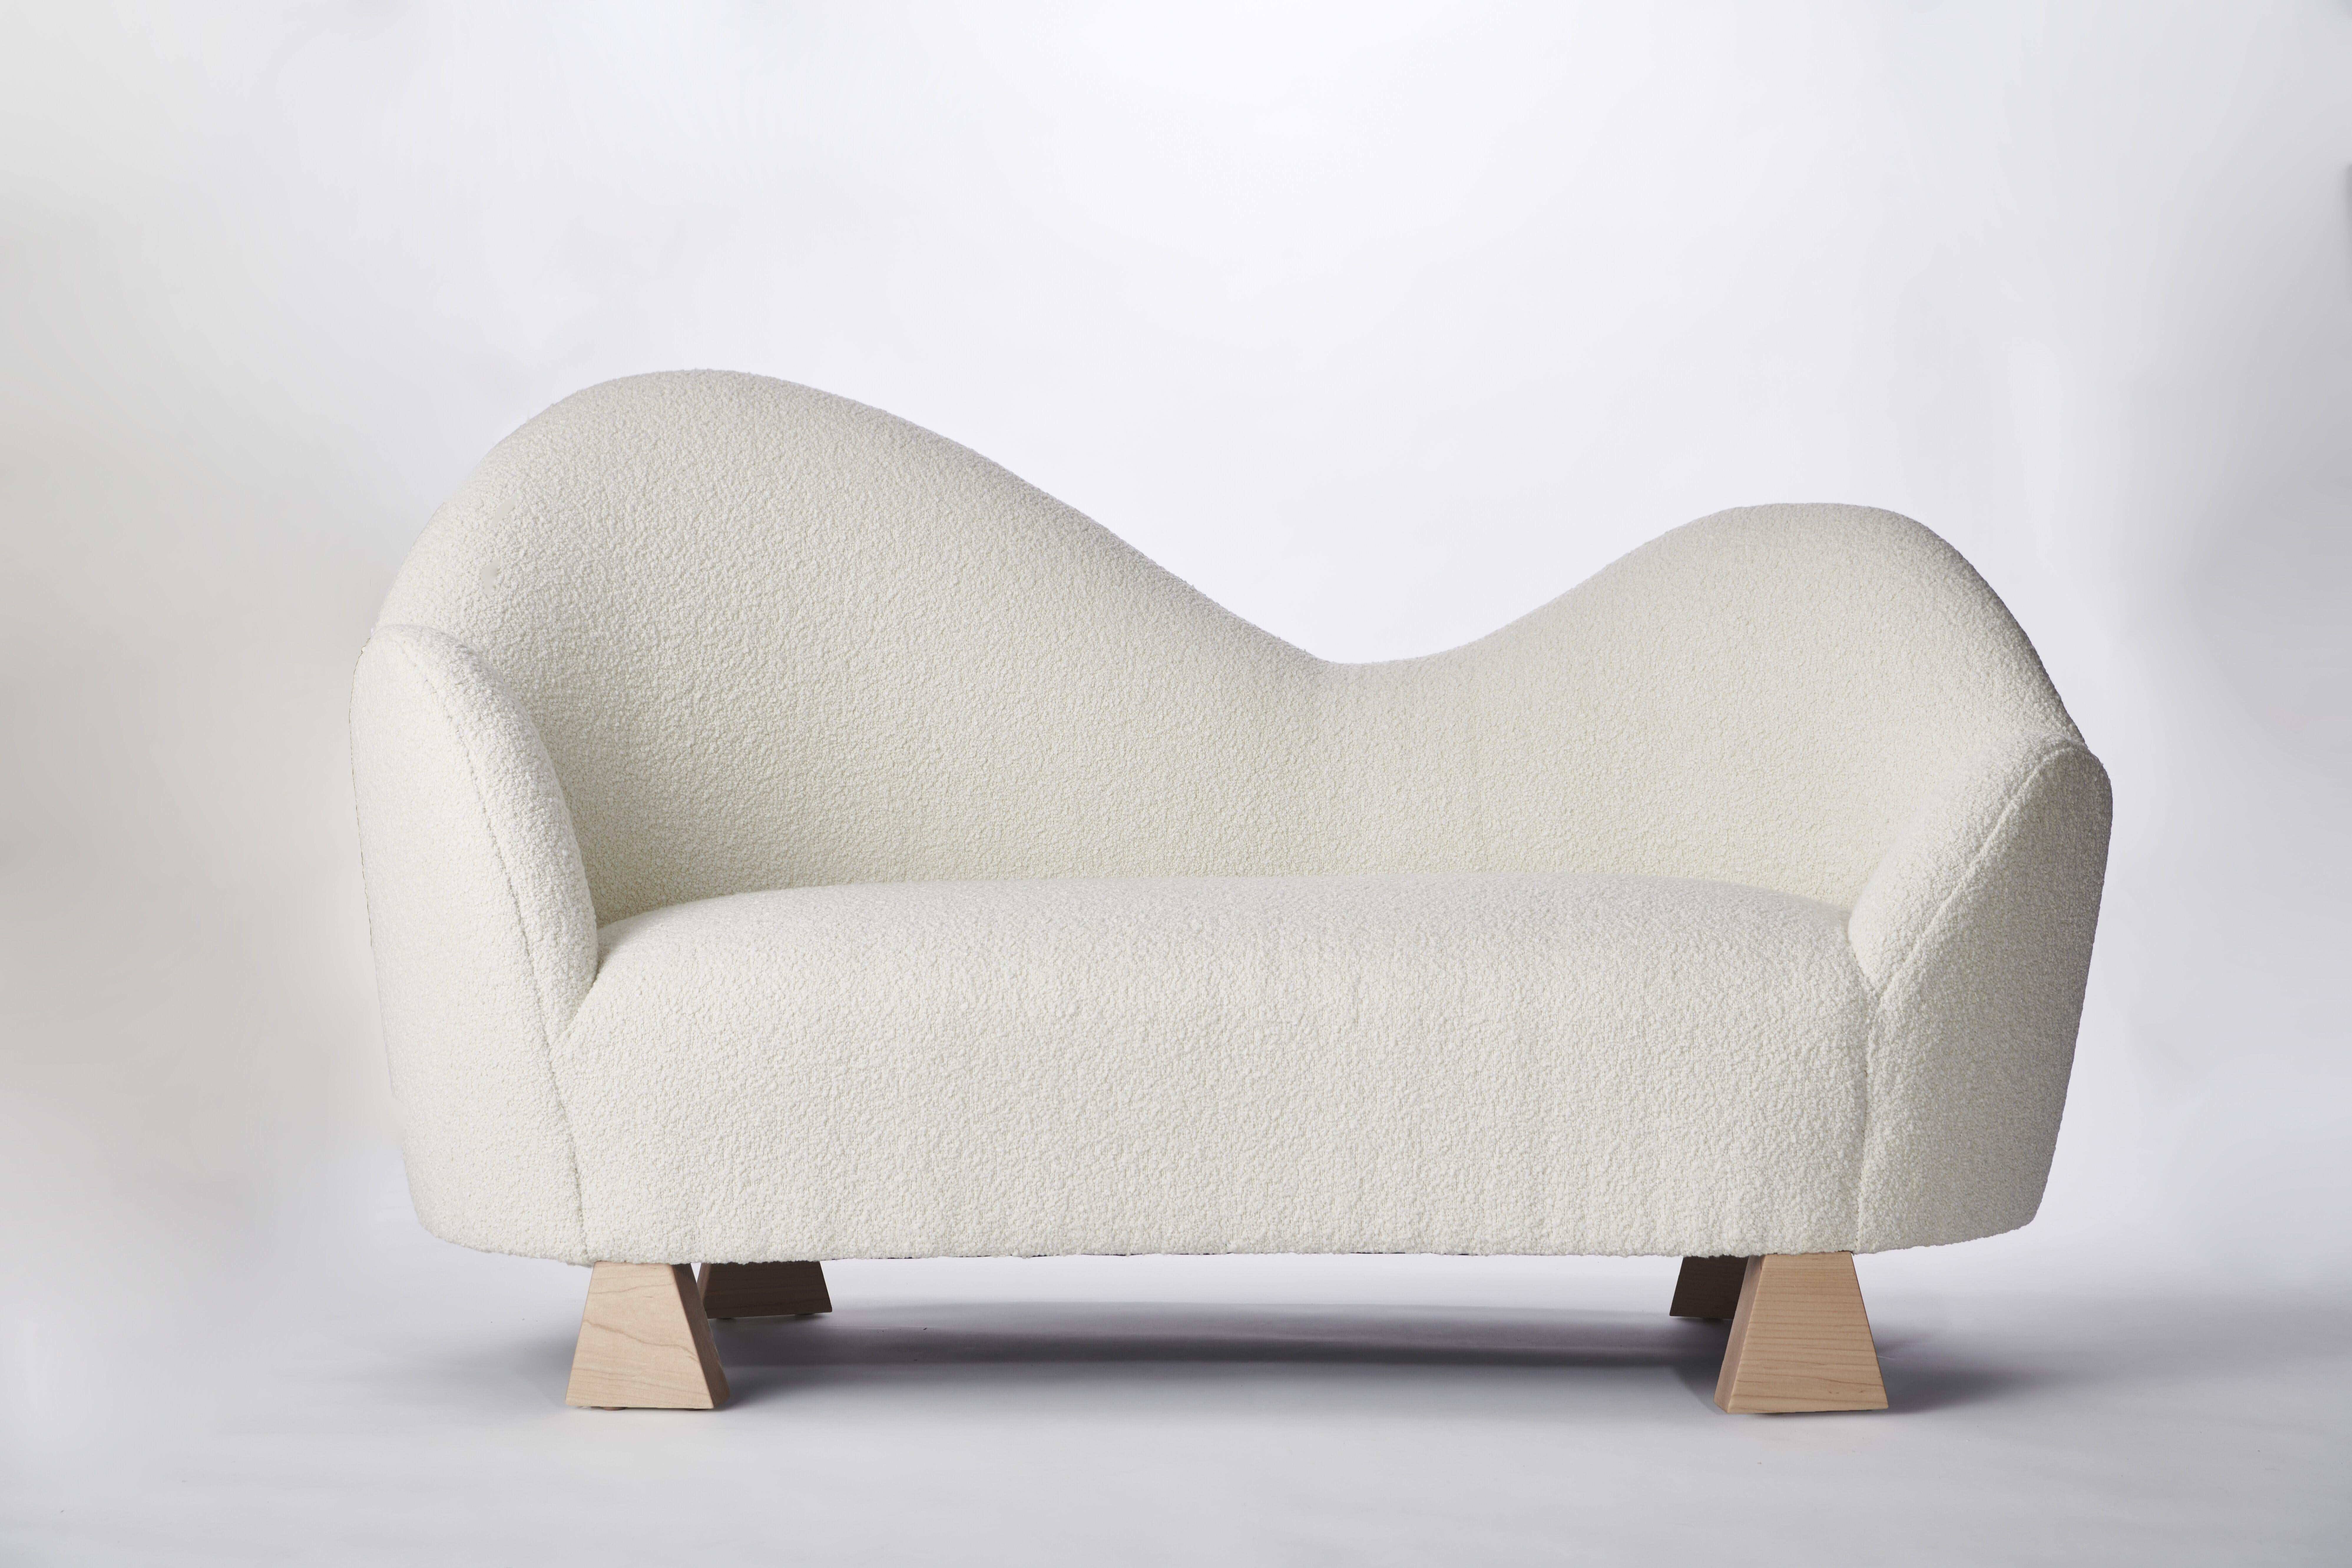 Made to order bouclé and wood settee designed by Christian Siriano.

Fabric: Ivory bouclé (available in custom fabric)
Base: Natural Maple (available in custom finish)
 
Dimensions: 
Overall Width: 64”
Overall Depth: 30” 
Overall Height: 41”
Seat